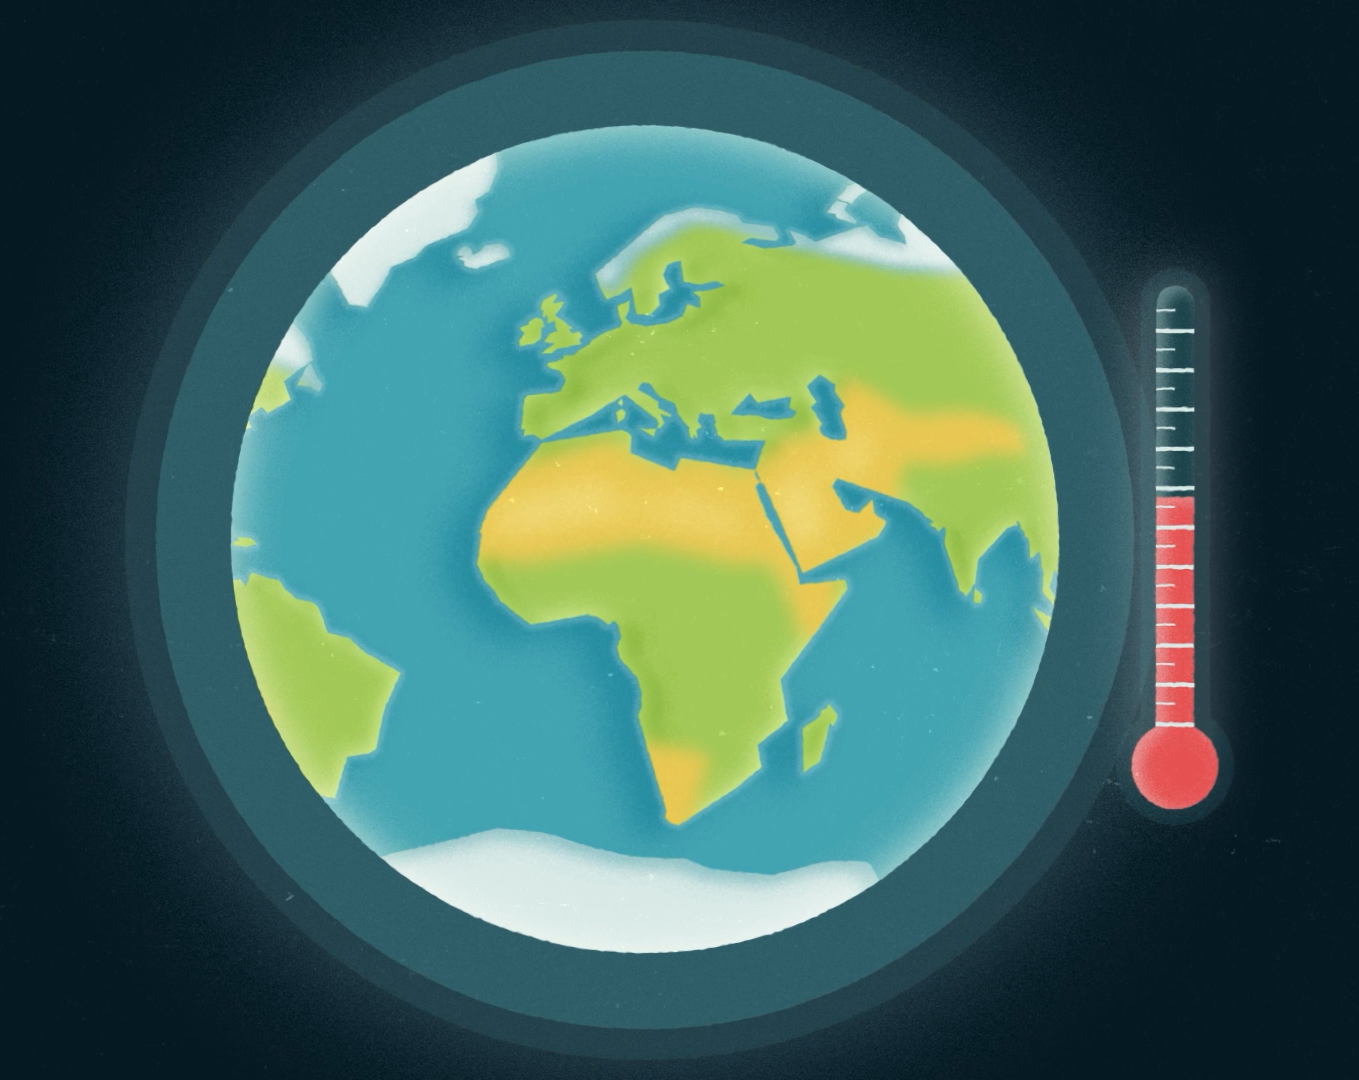 Screenshot from the IKI film. A drawn globe, next to it a thermometer